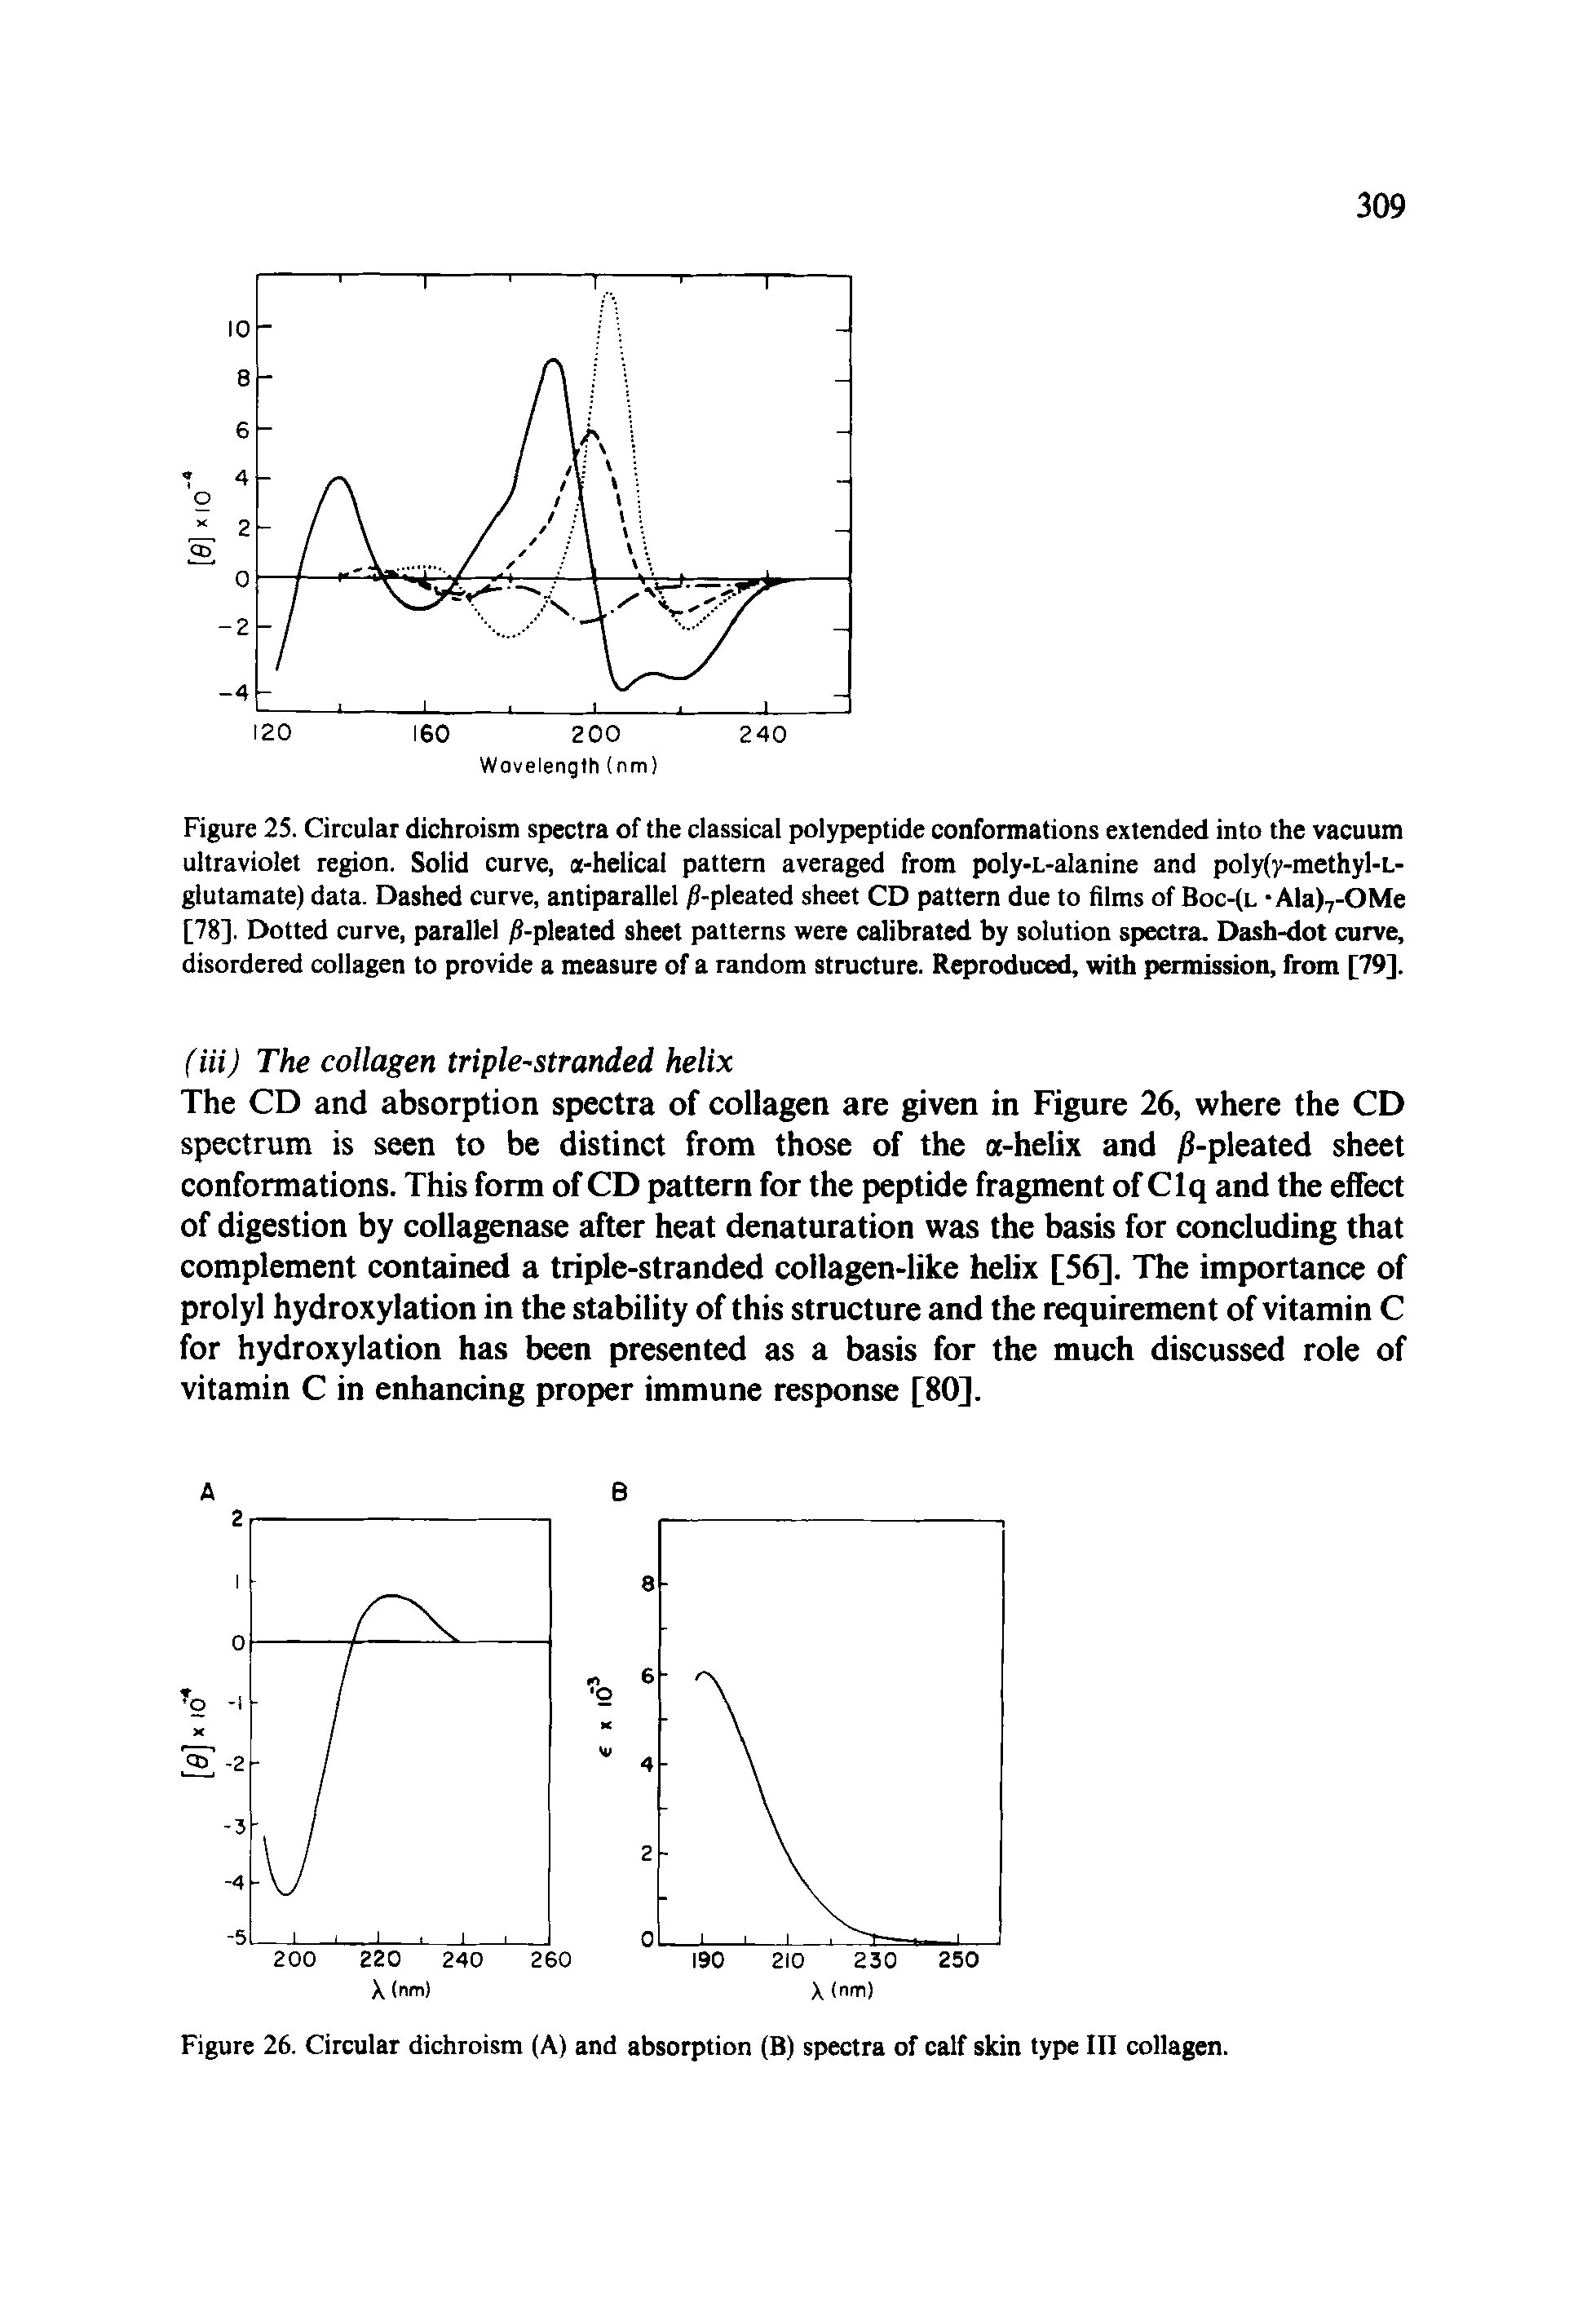 Figure 25. Circular dichroism spectra of the classical polypeptide conformations extended into the vacuum ultraviolet region. Solid curve, a-helical pattern averaged from poly-L-alanine and poly(y-methyl-L-glutamate) data. Dashed curve, antiparallel /5-pleated sheet CD pattern due to films of Boc-(l -Ala)7-OMe [78]. Dotted curve, parallel /S-pleated sheet patterns were calibrated by solution spectra. Dash-dot curve, disordered collagen to provide a measure of a random structure. Reproduced, with permission, from [79].